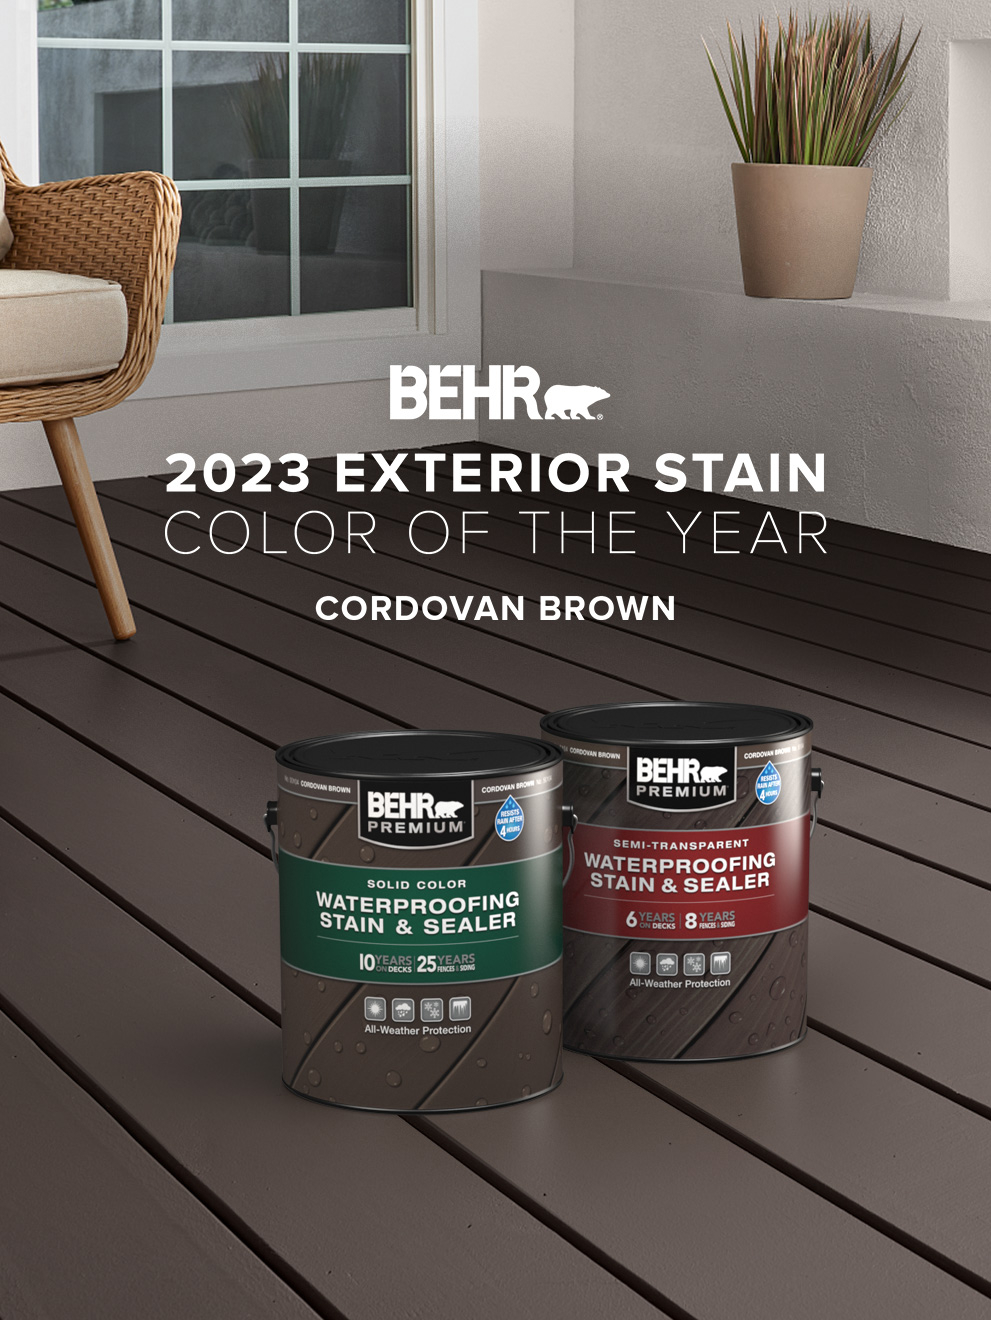 Cordovan Brown - 2023 Exterior Stain Color of the Year